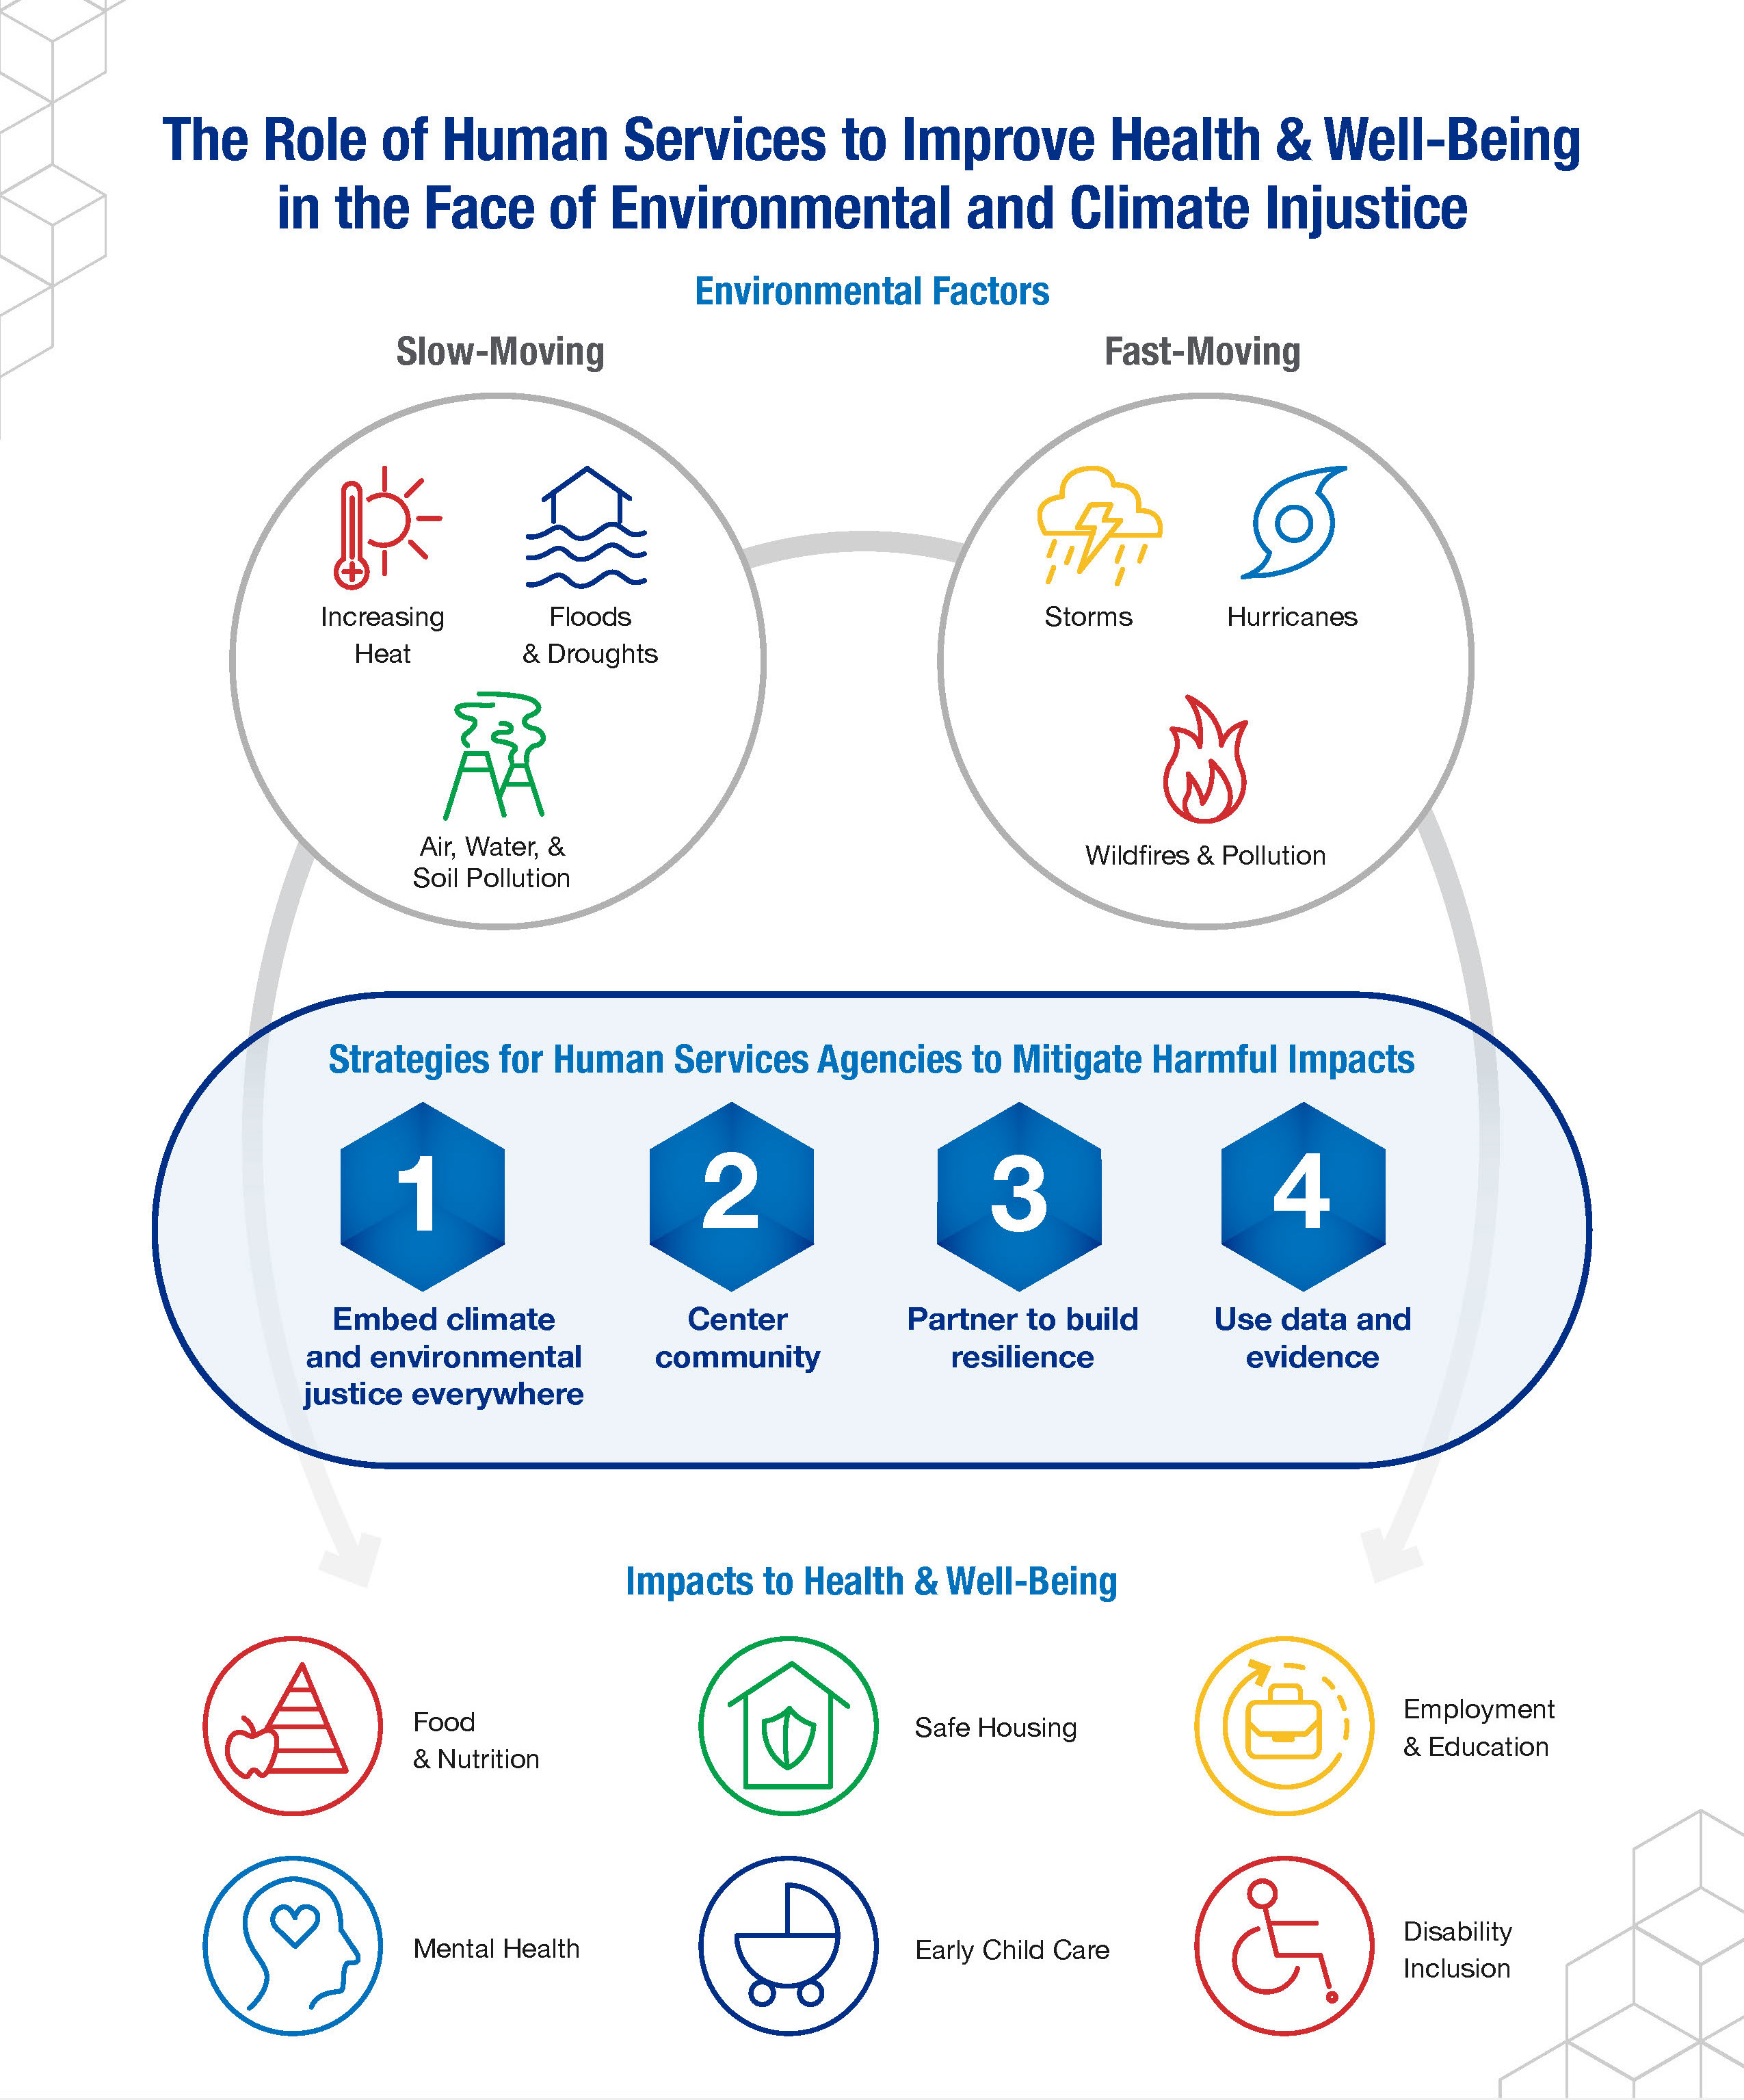 Environmental Justice Infographic